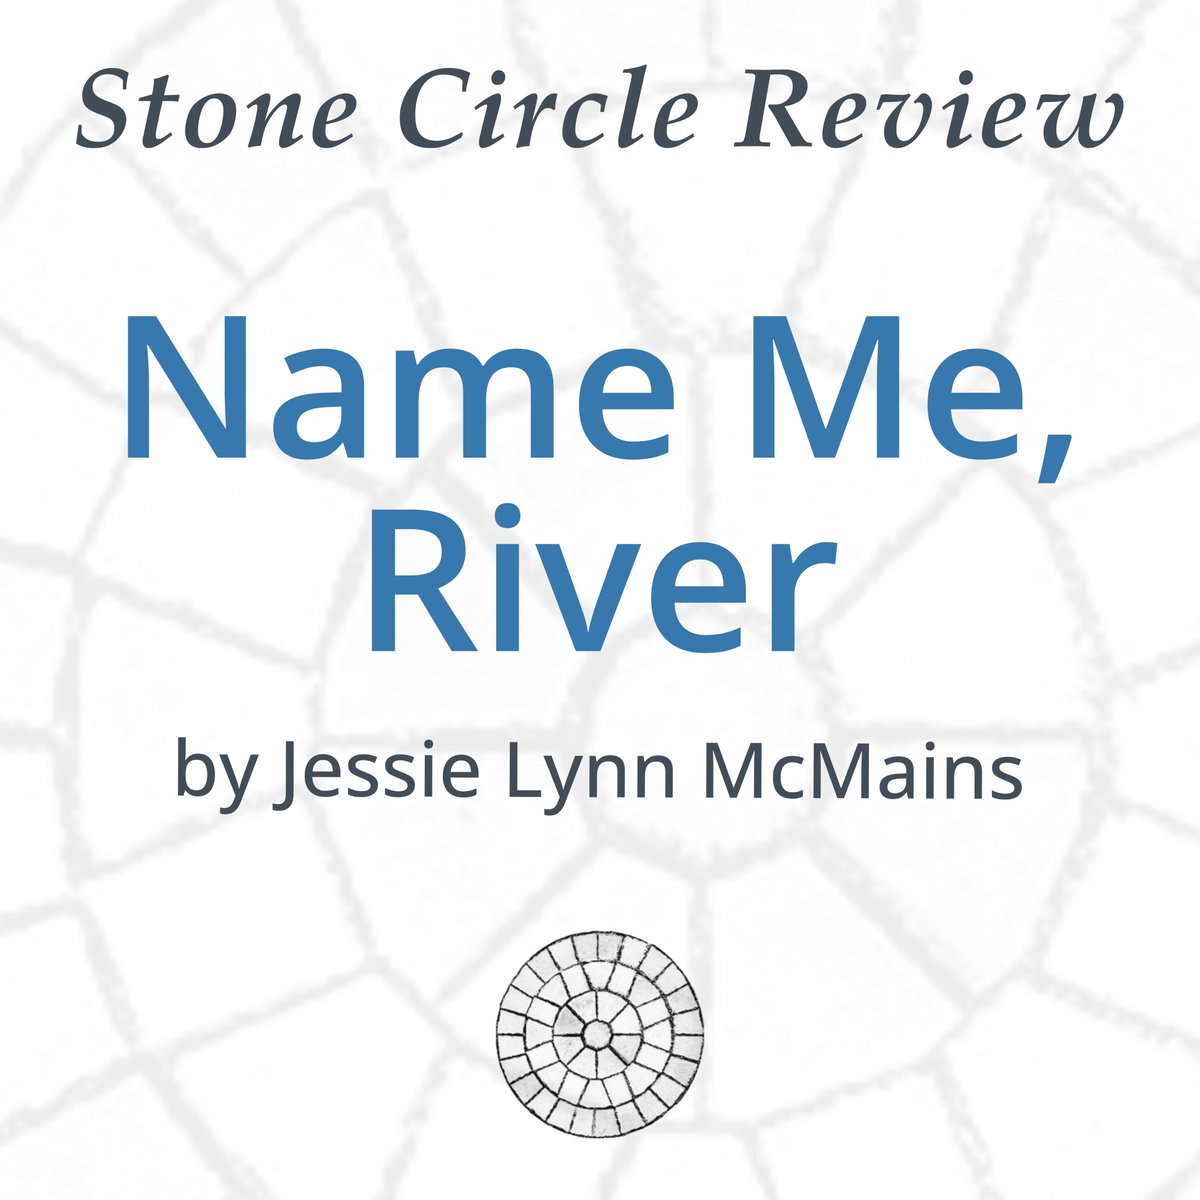 NEW POEM #124: 'Name Me, River' by Jessie Lynn McMains (@rustbeltjessie) 'Name me woman and I’ll open up my chest and show you the wind; April wind, its easterly flow.' stonecirclereview.com/name-me-river/ #Poem #PoetryCommunity #Poetry #NewPoem